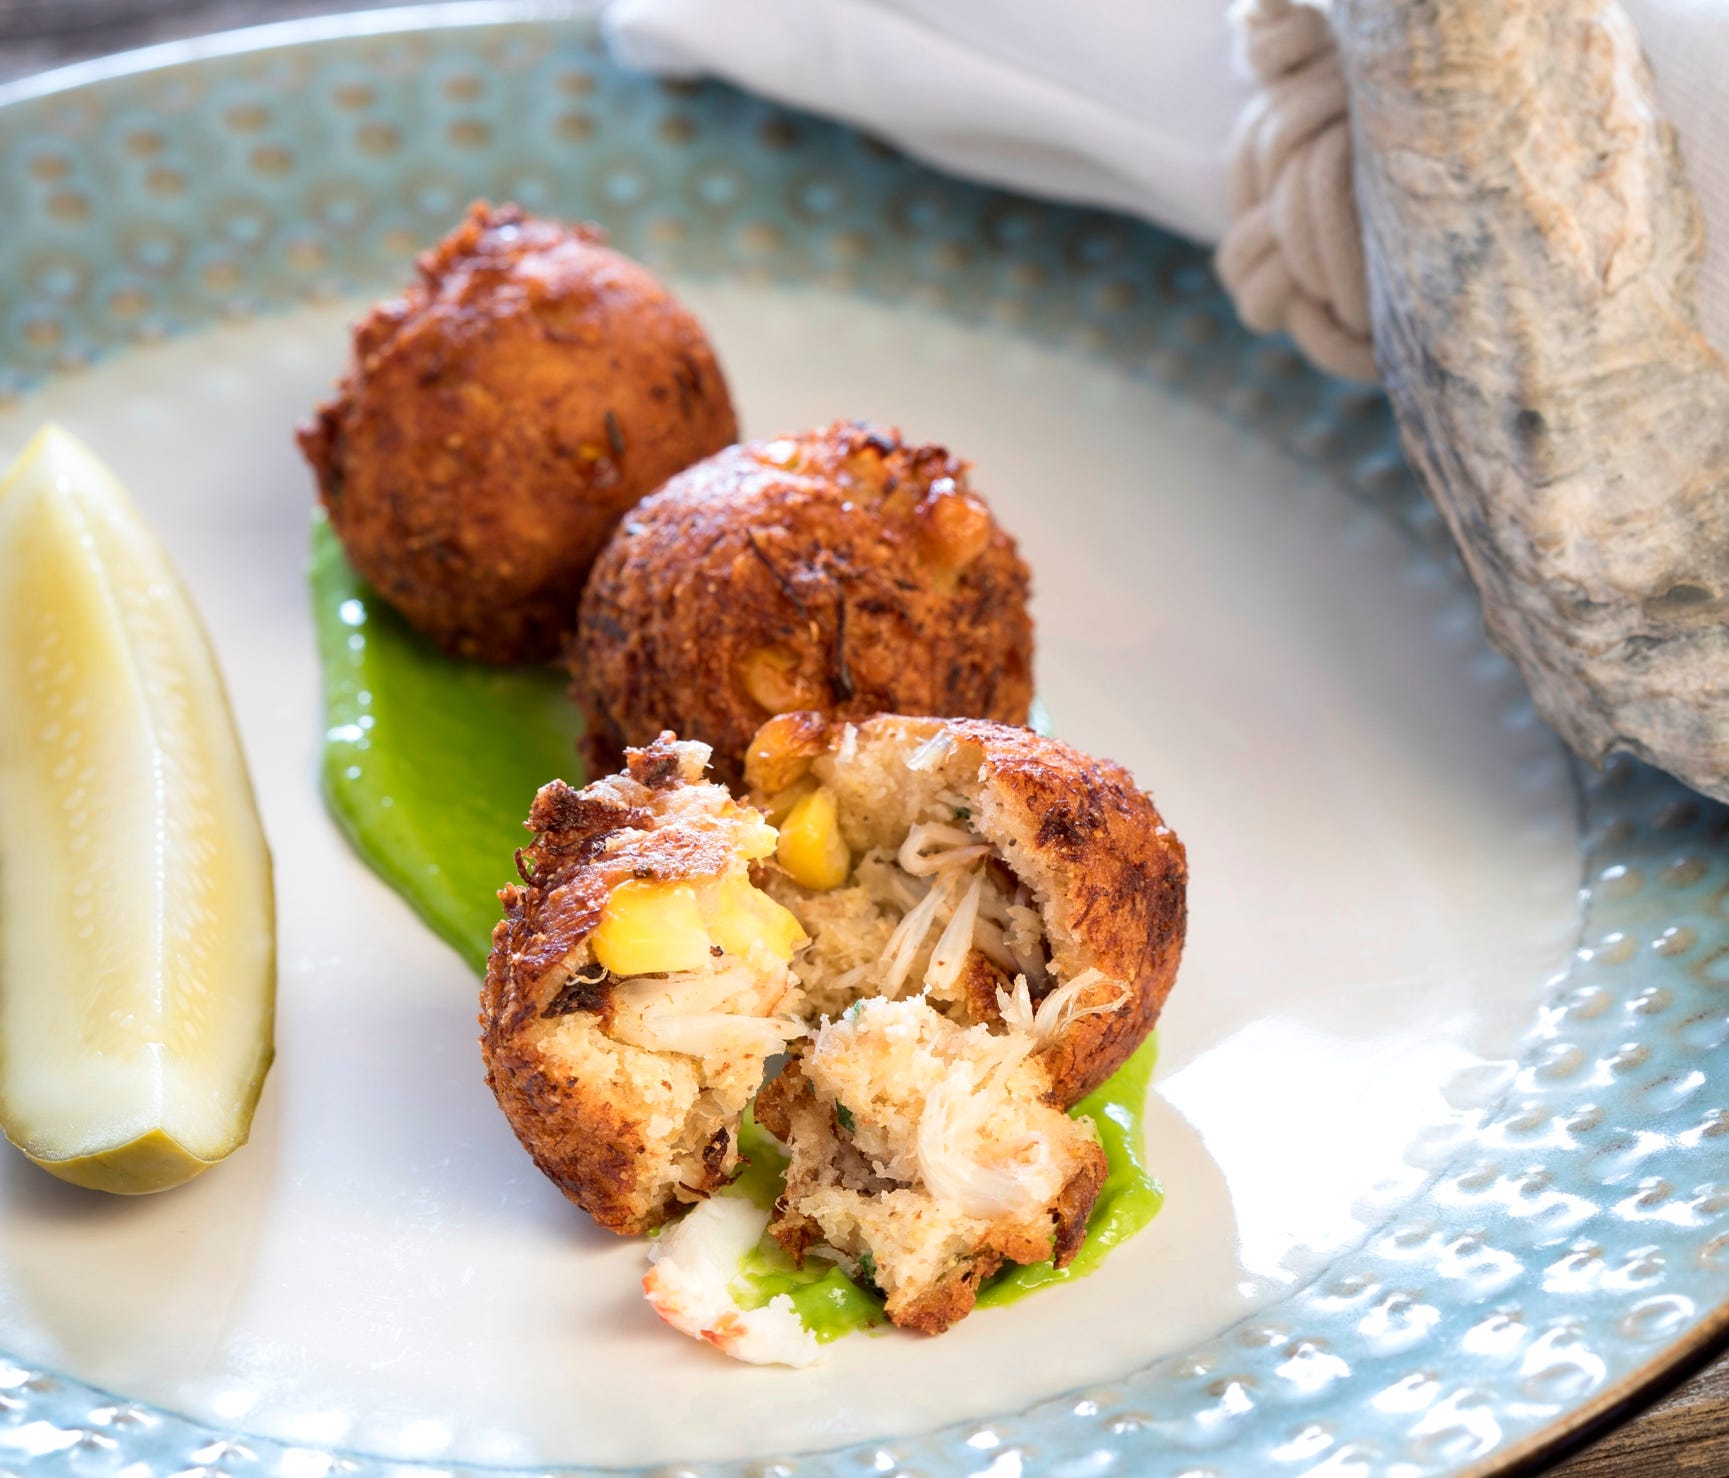 The crab hush puppies served at the Georgia Sea Grill in St. Simons Island, Ga., take the humble hush puppy to a new level.